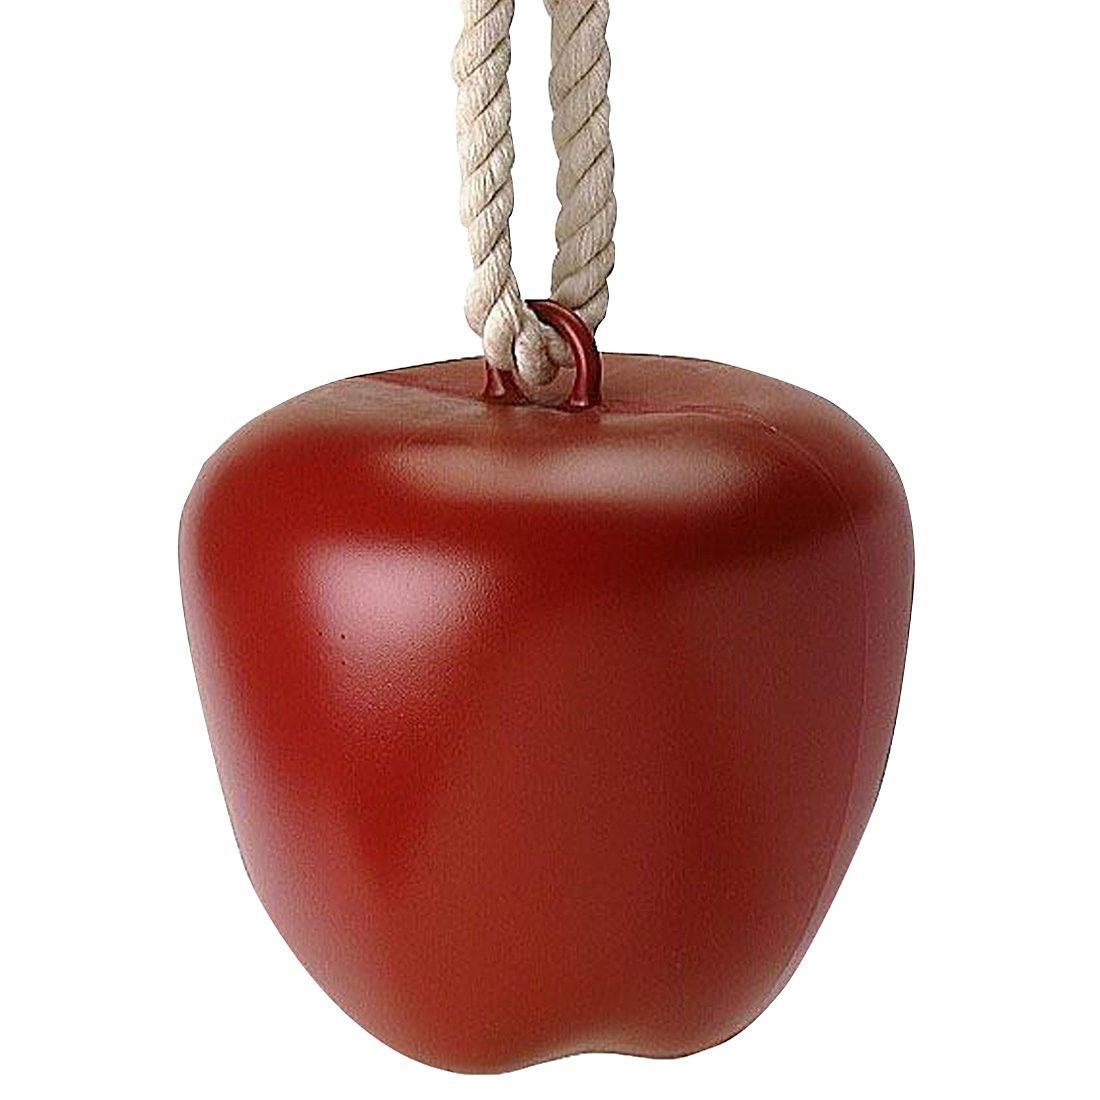 Horsemens Pride Jolly Apple (Red) (One Size)